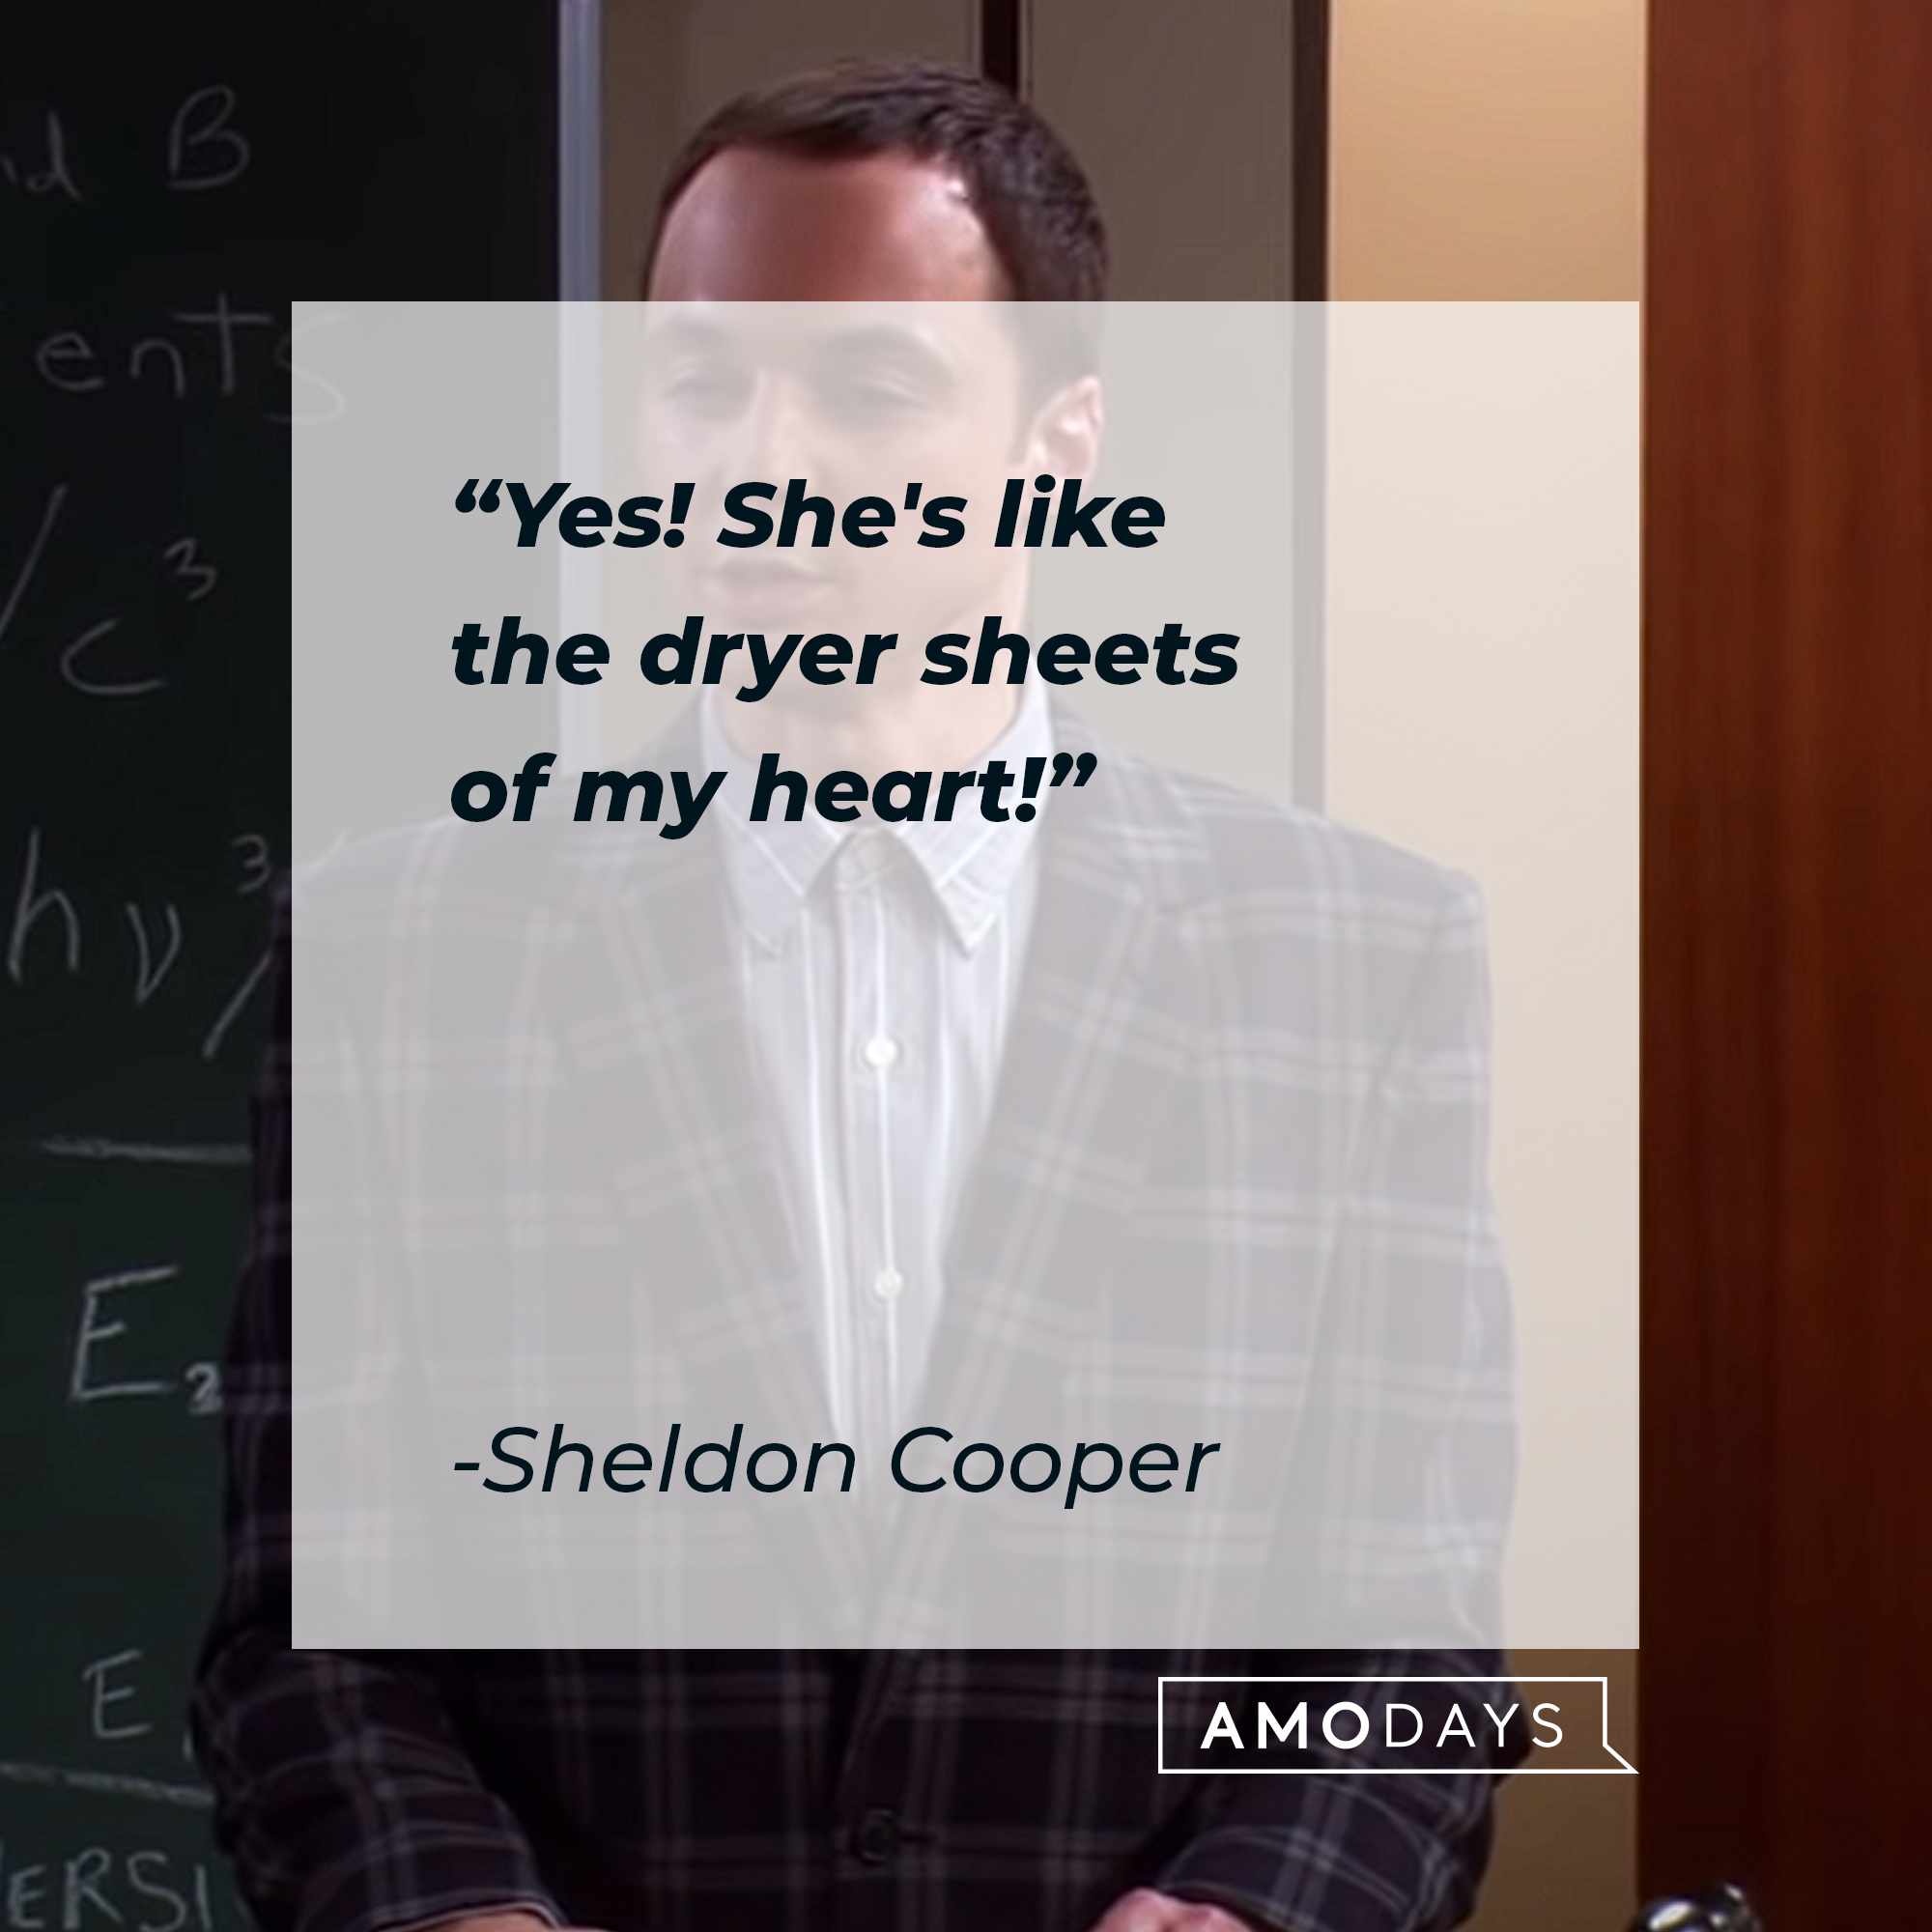 Sheldon Cooper's quote: "Yes! She's like the dryer sheets of my heart!" | Source: youtube.com/warnerbrostv